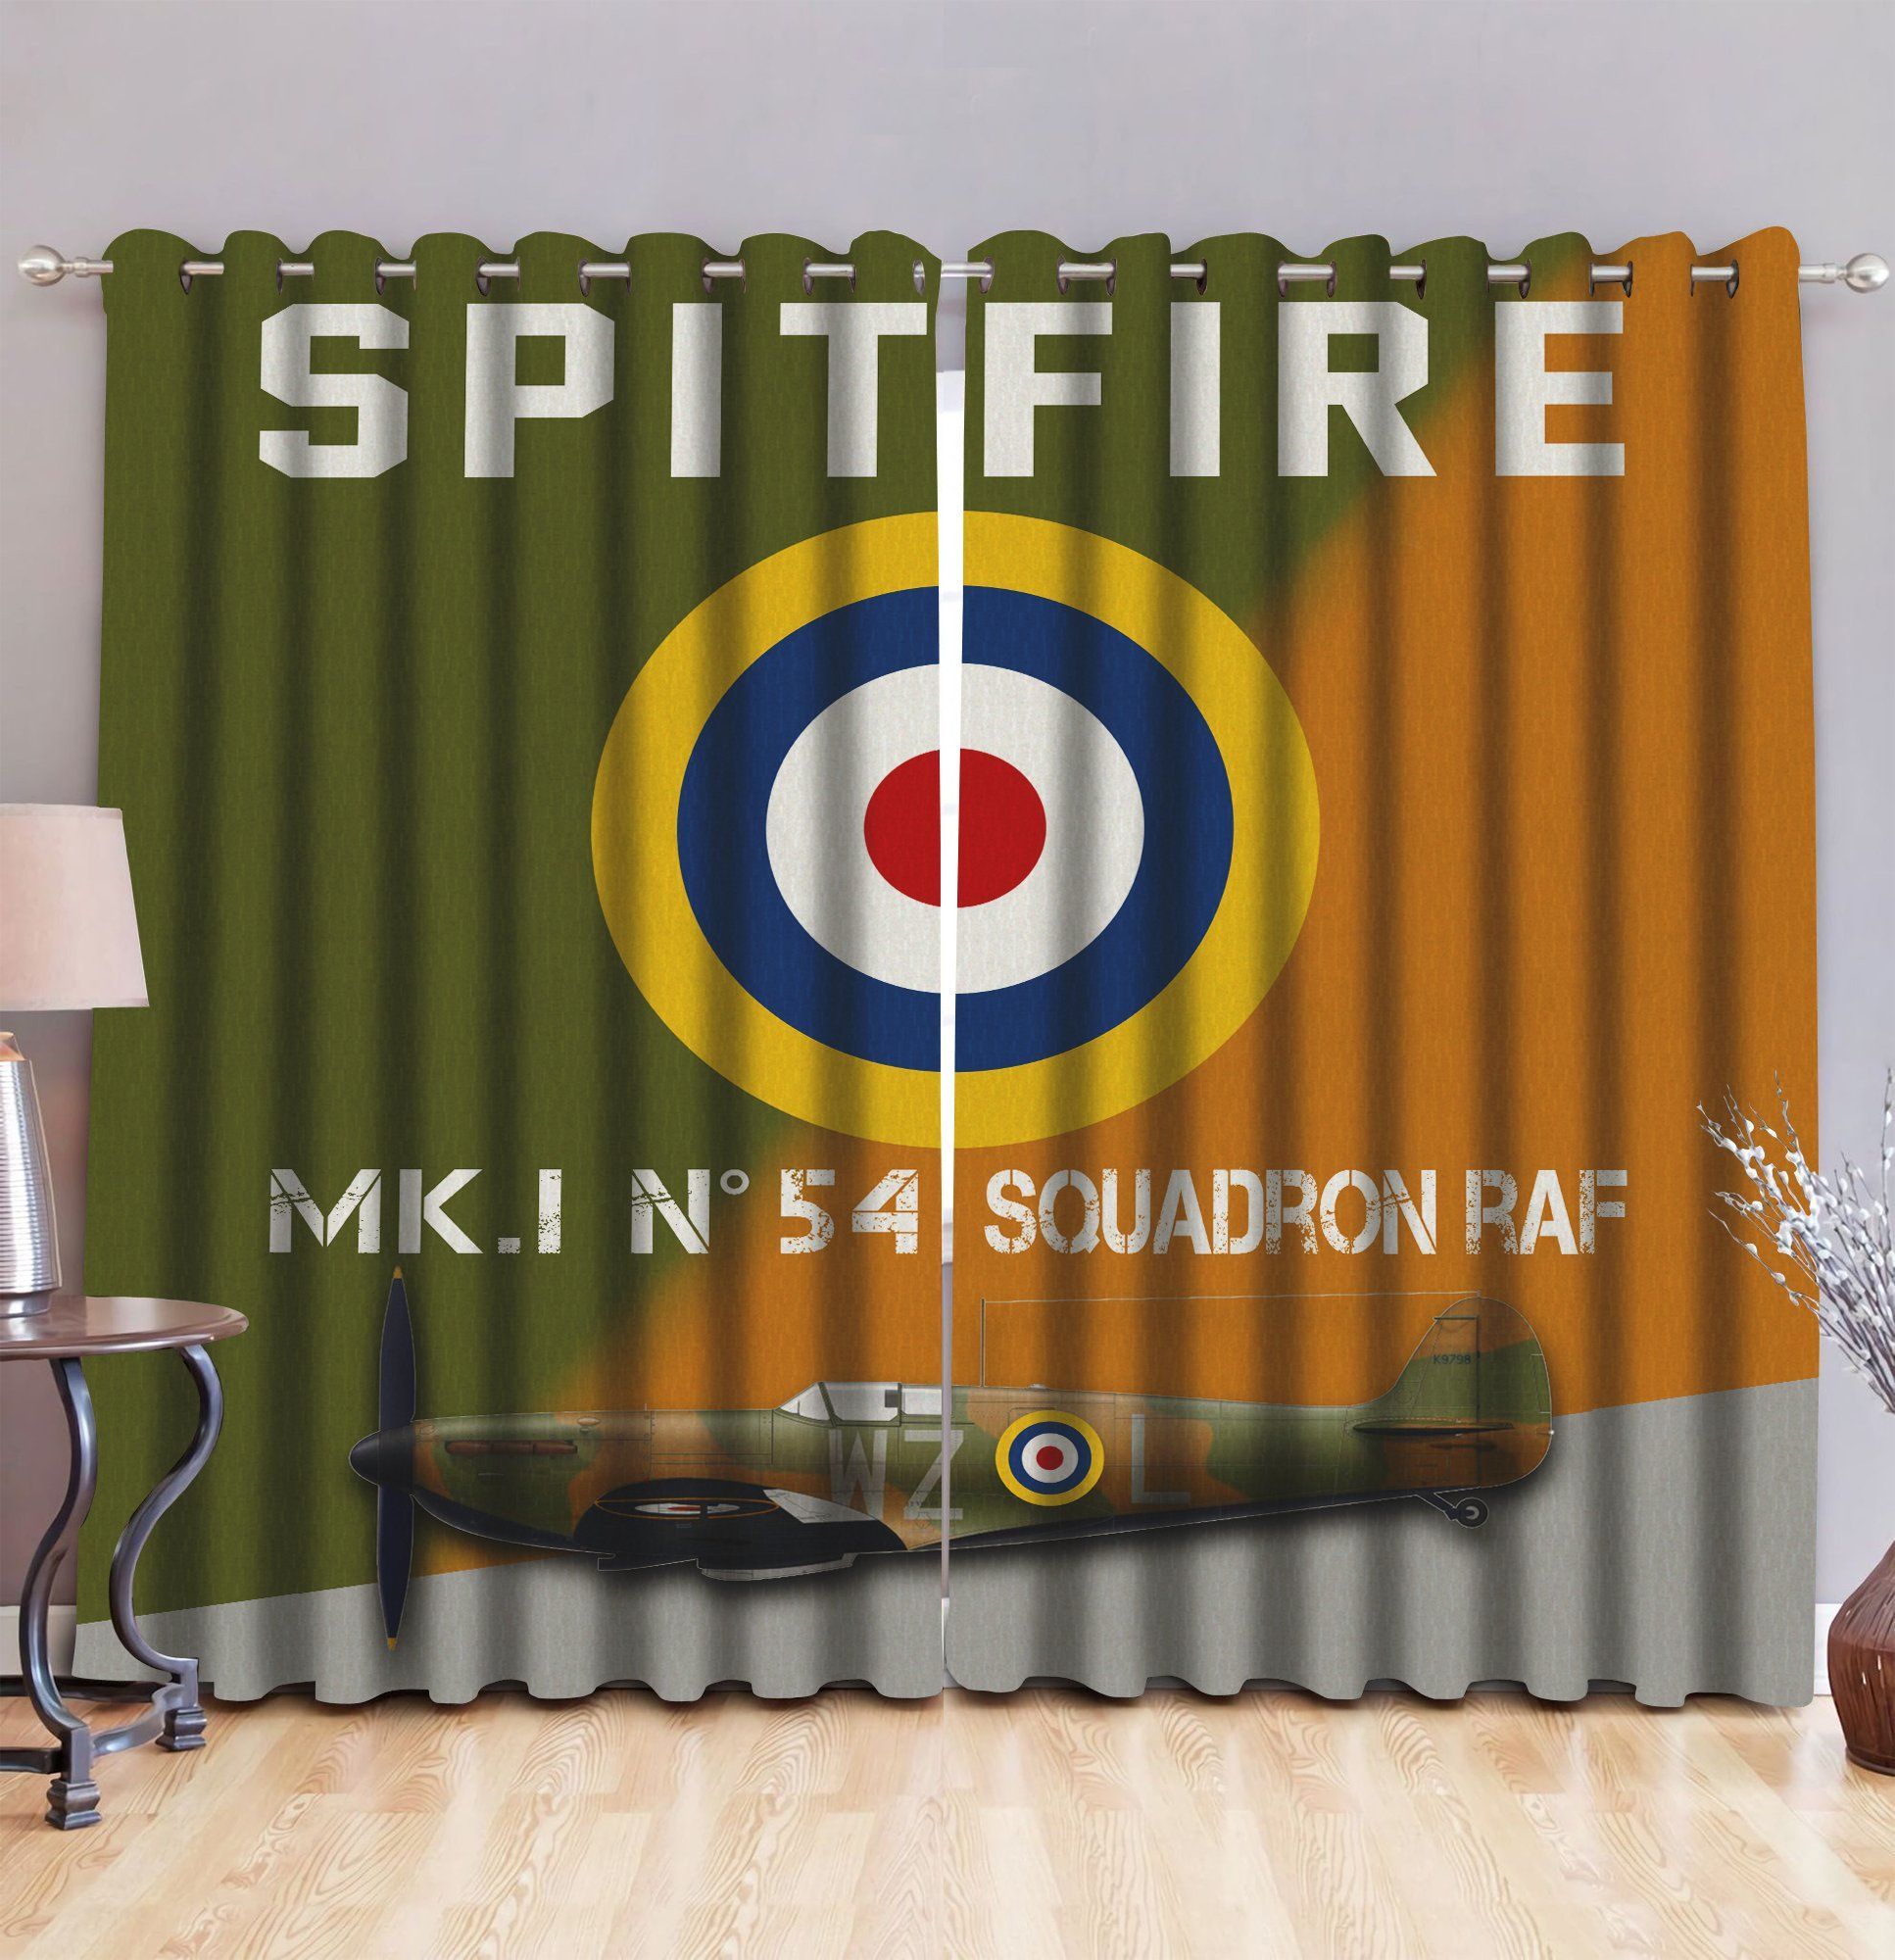 Spitfire Mkin 54 Squadron Paf Printed Window Curtain